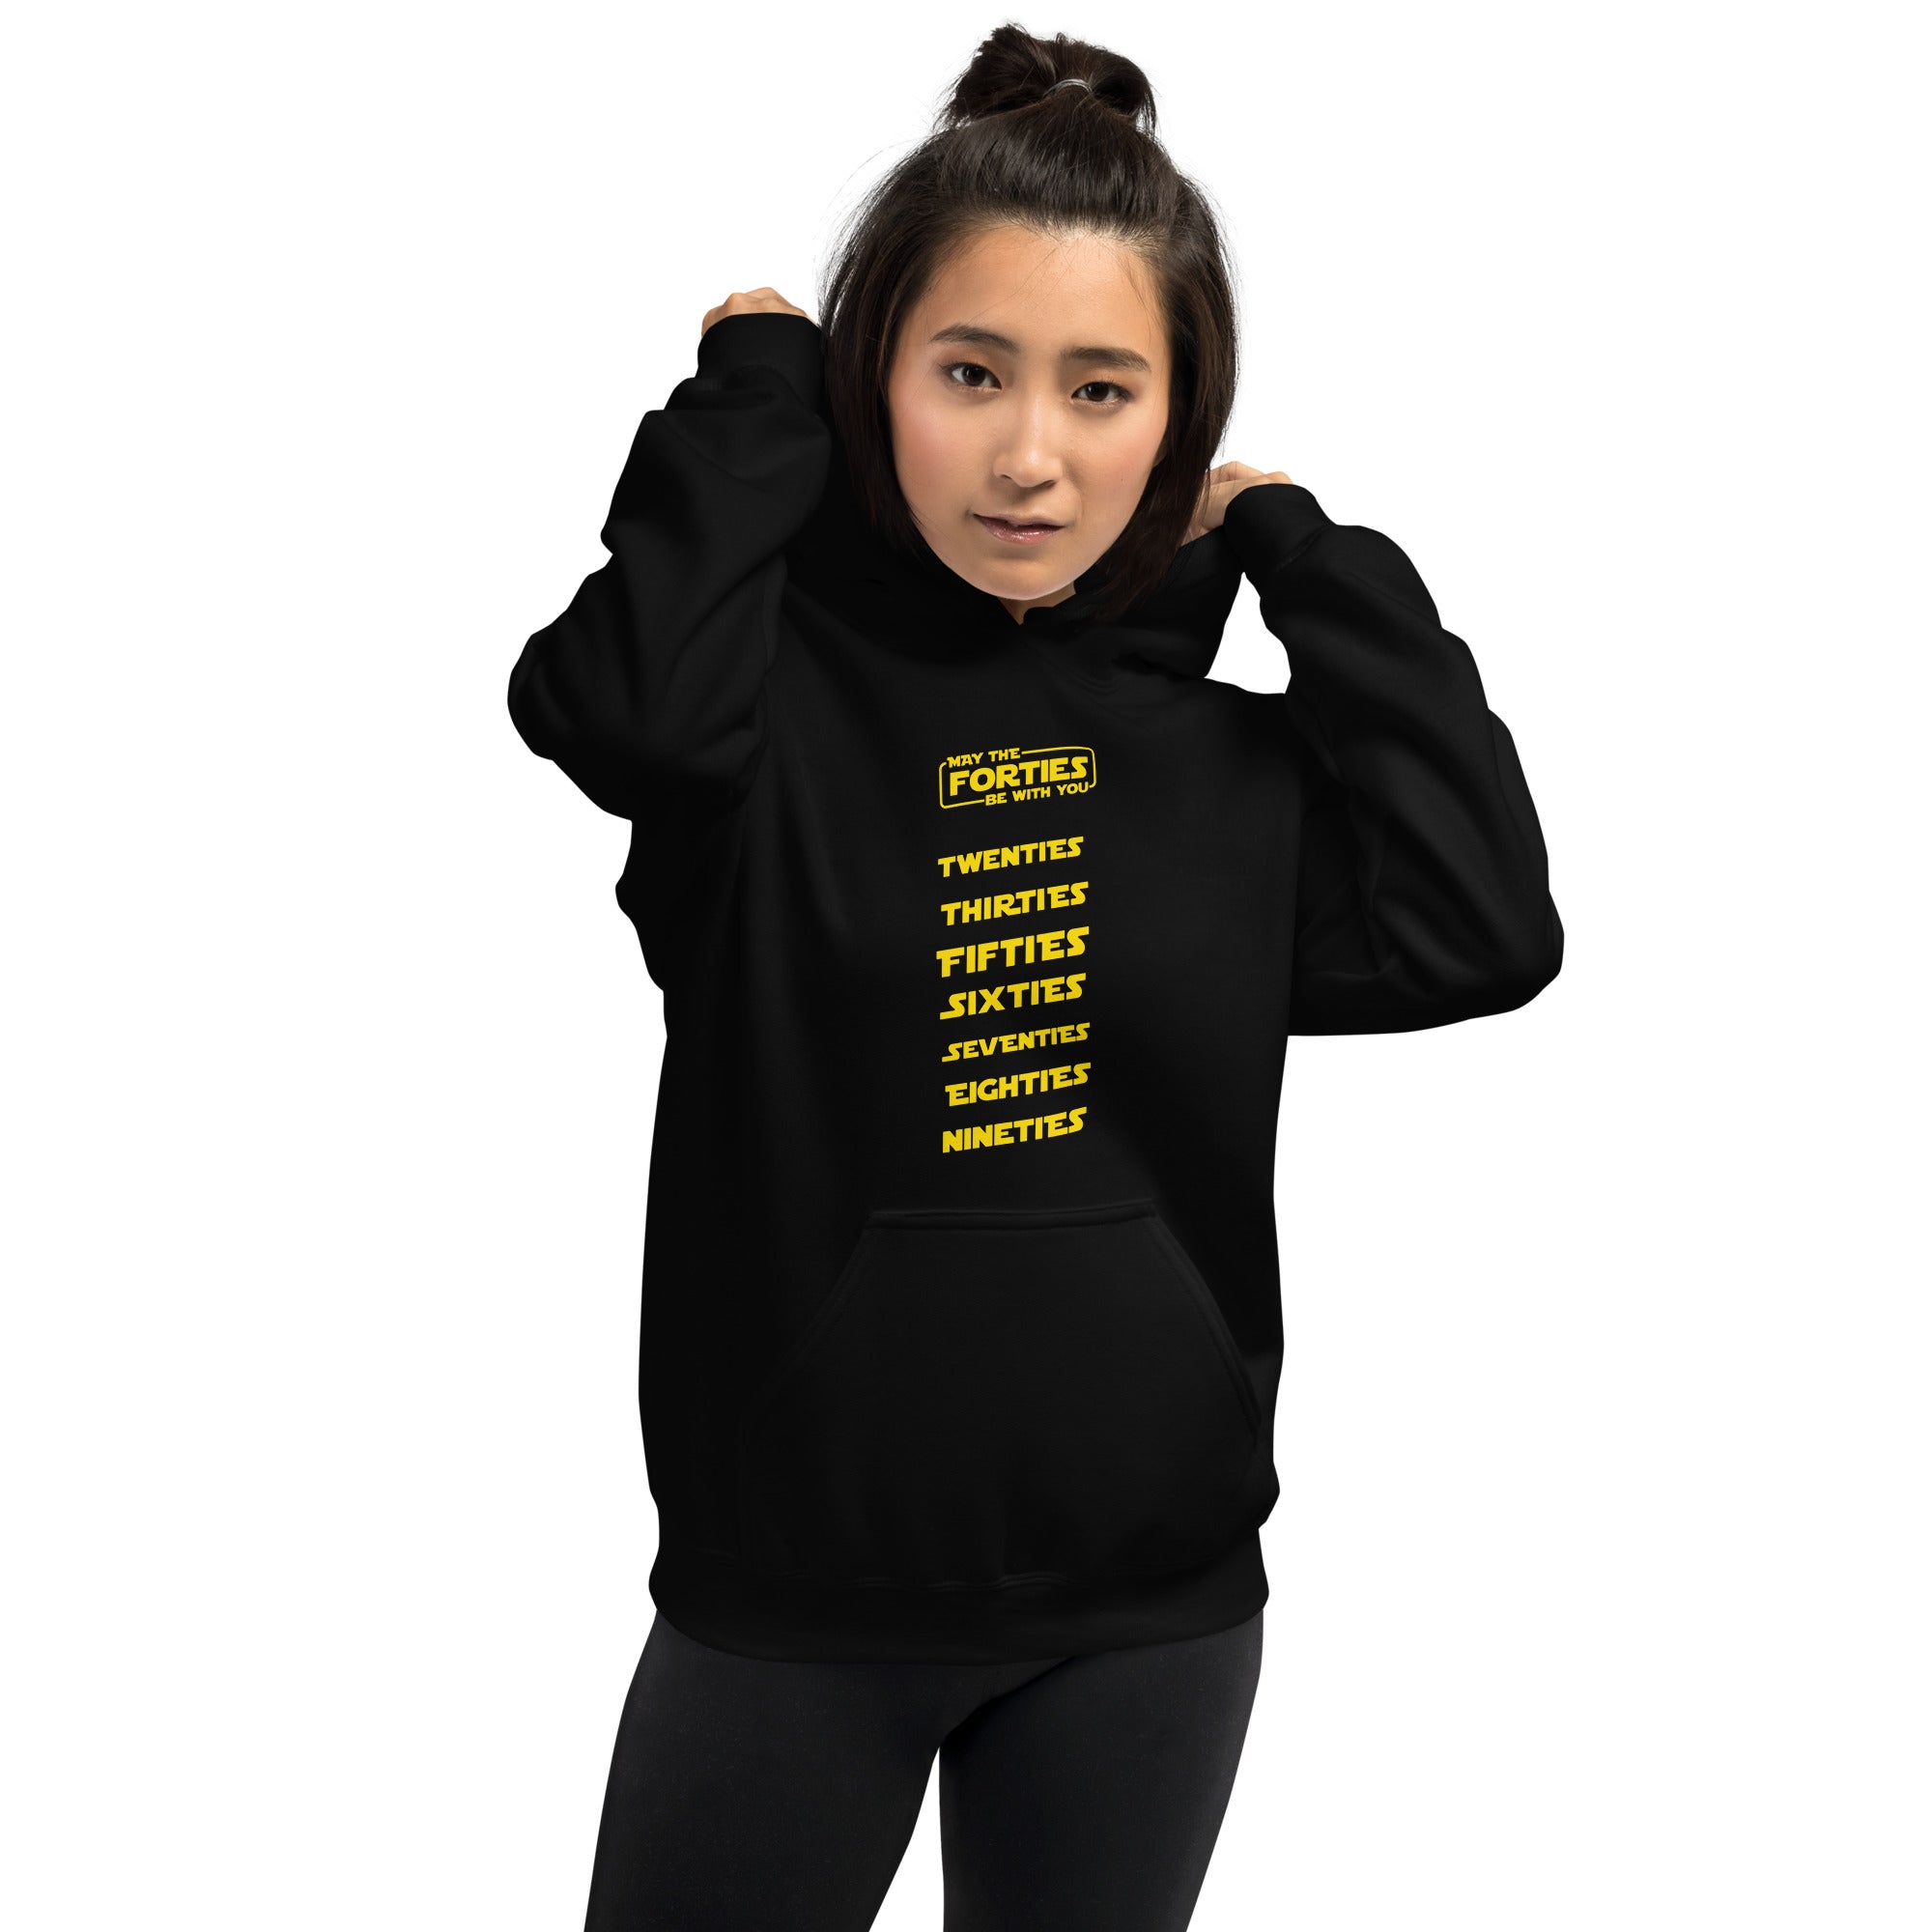 May The Forties Be With You - Unisex Hoodie